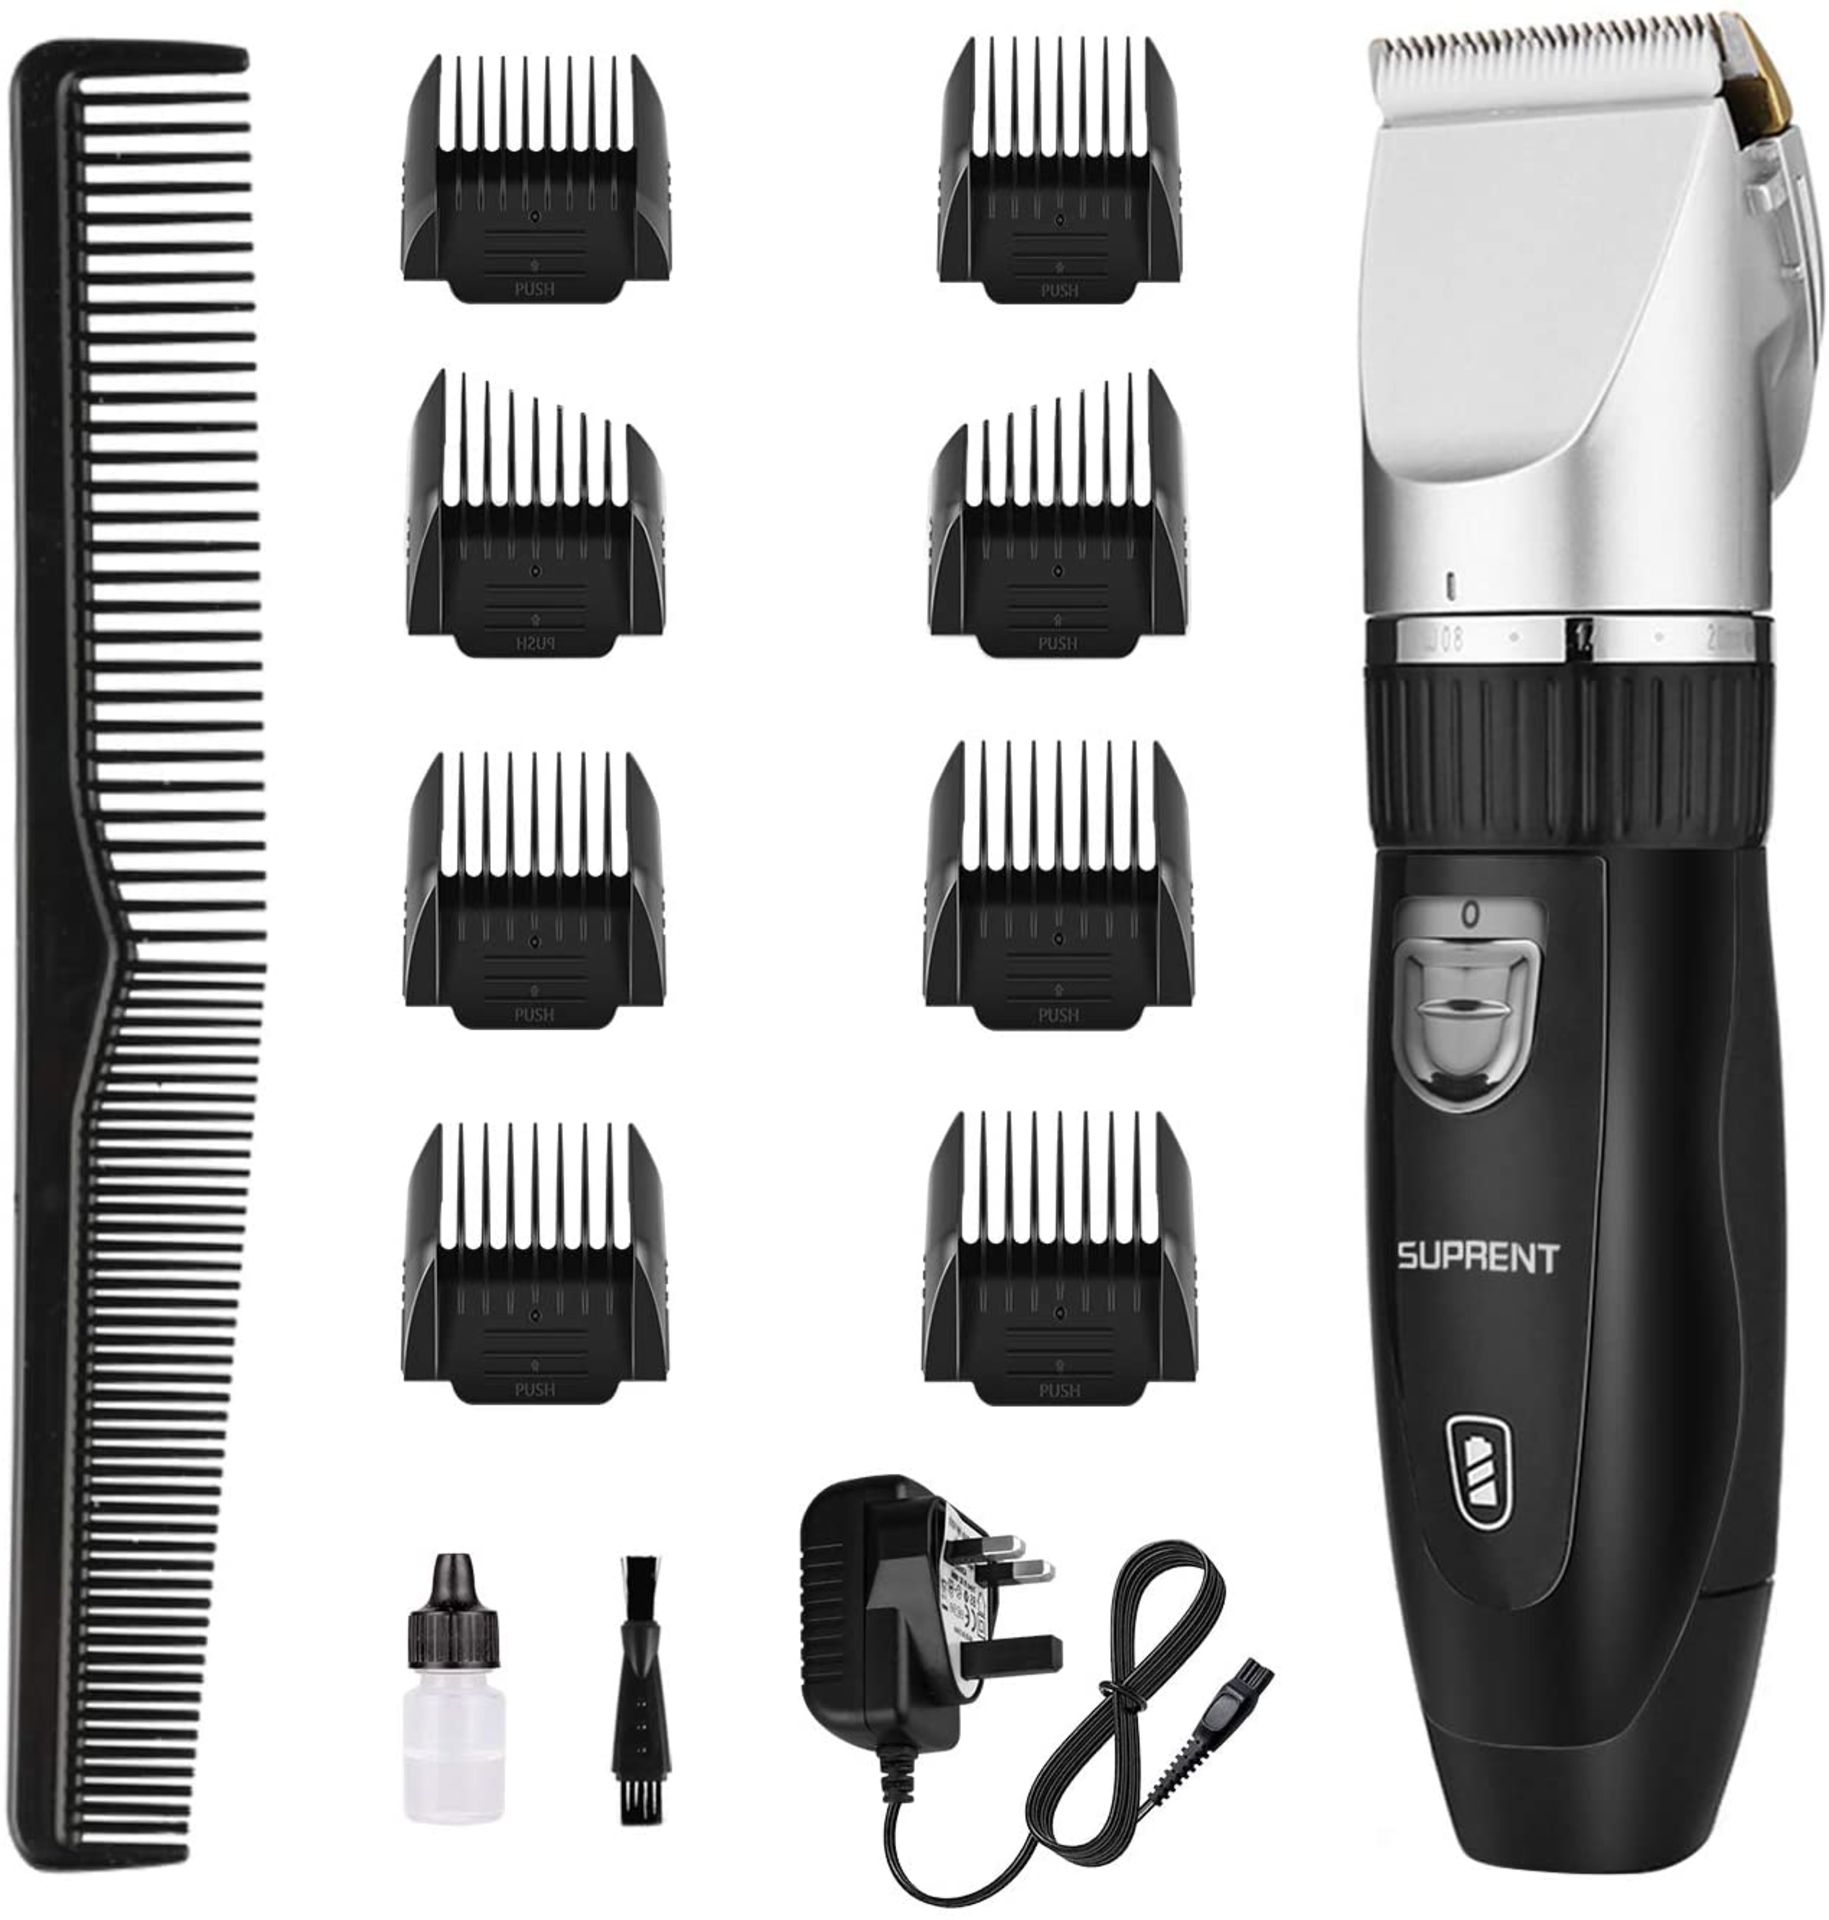 SUPRENT Cordless Hair Clippers for Men, Professional Rechargeable Hair Trimmer, Hair Cutting Kit wit